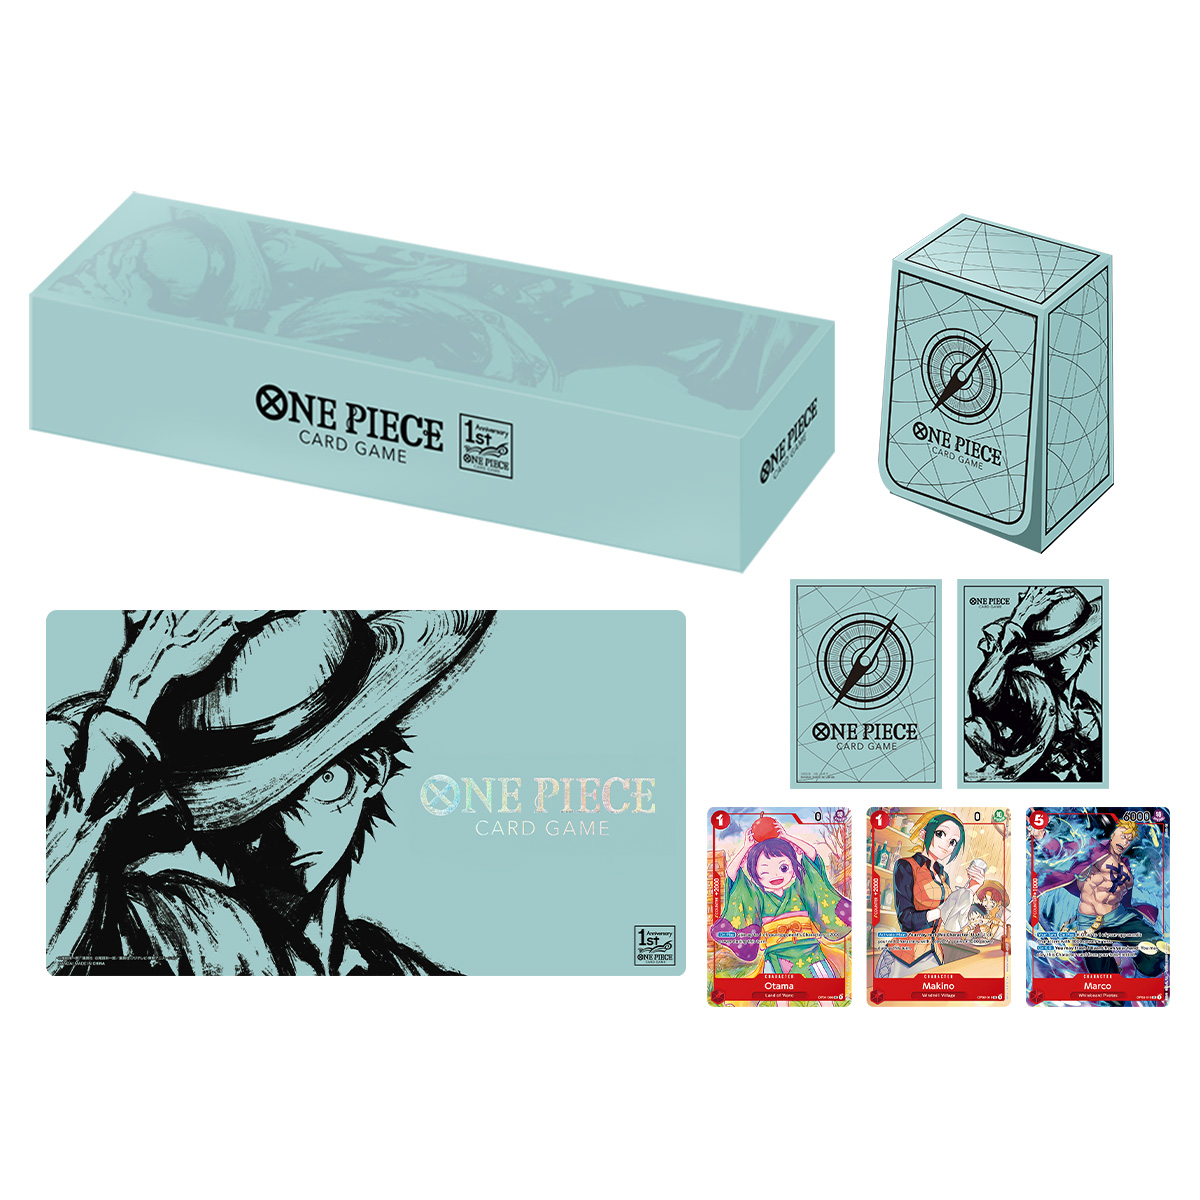 One Piece Card Game 1st Anniversary Set (Japanese)